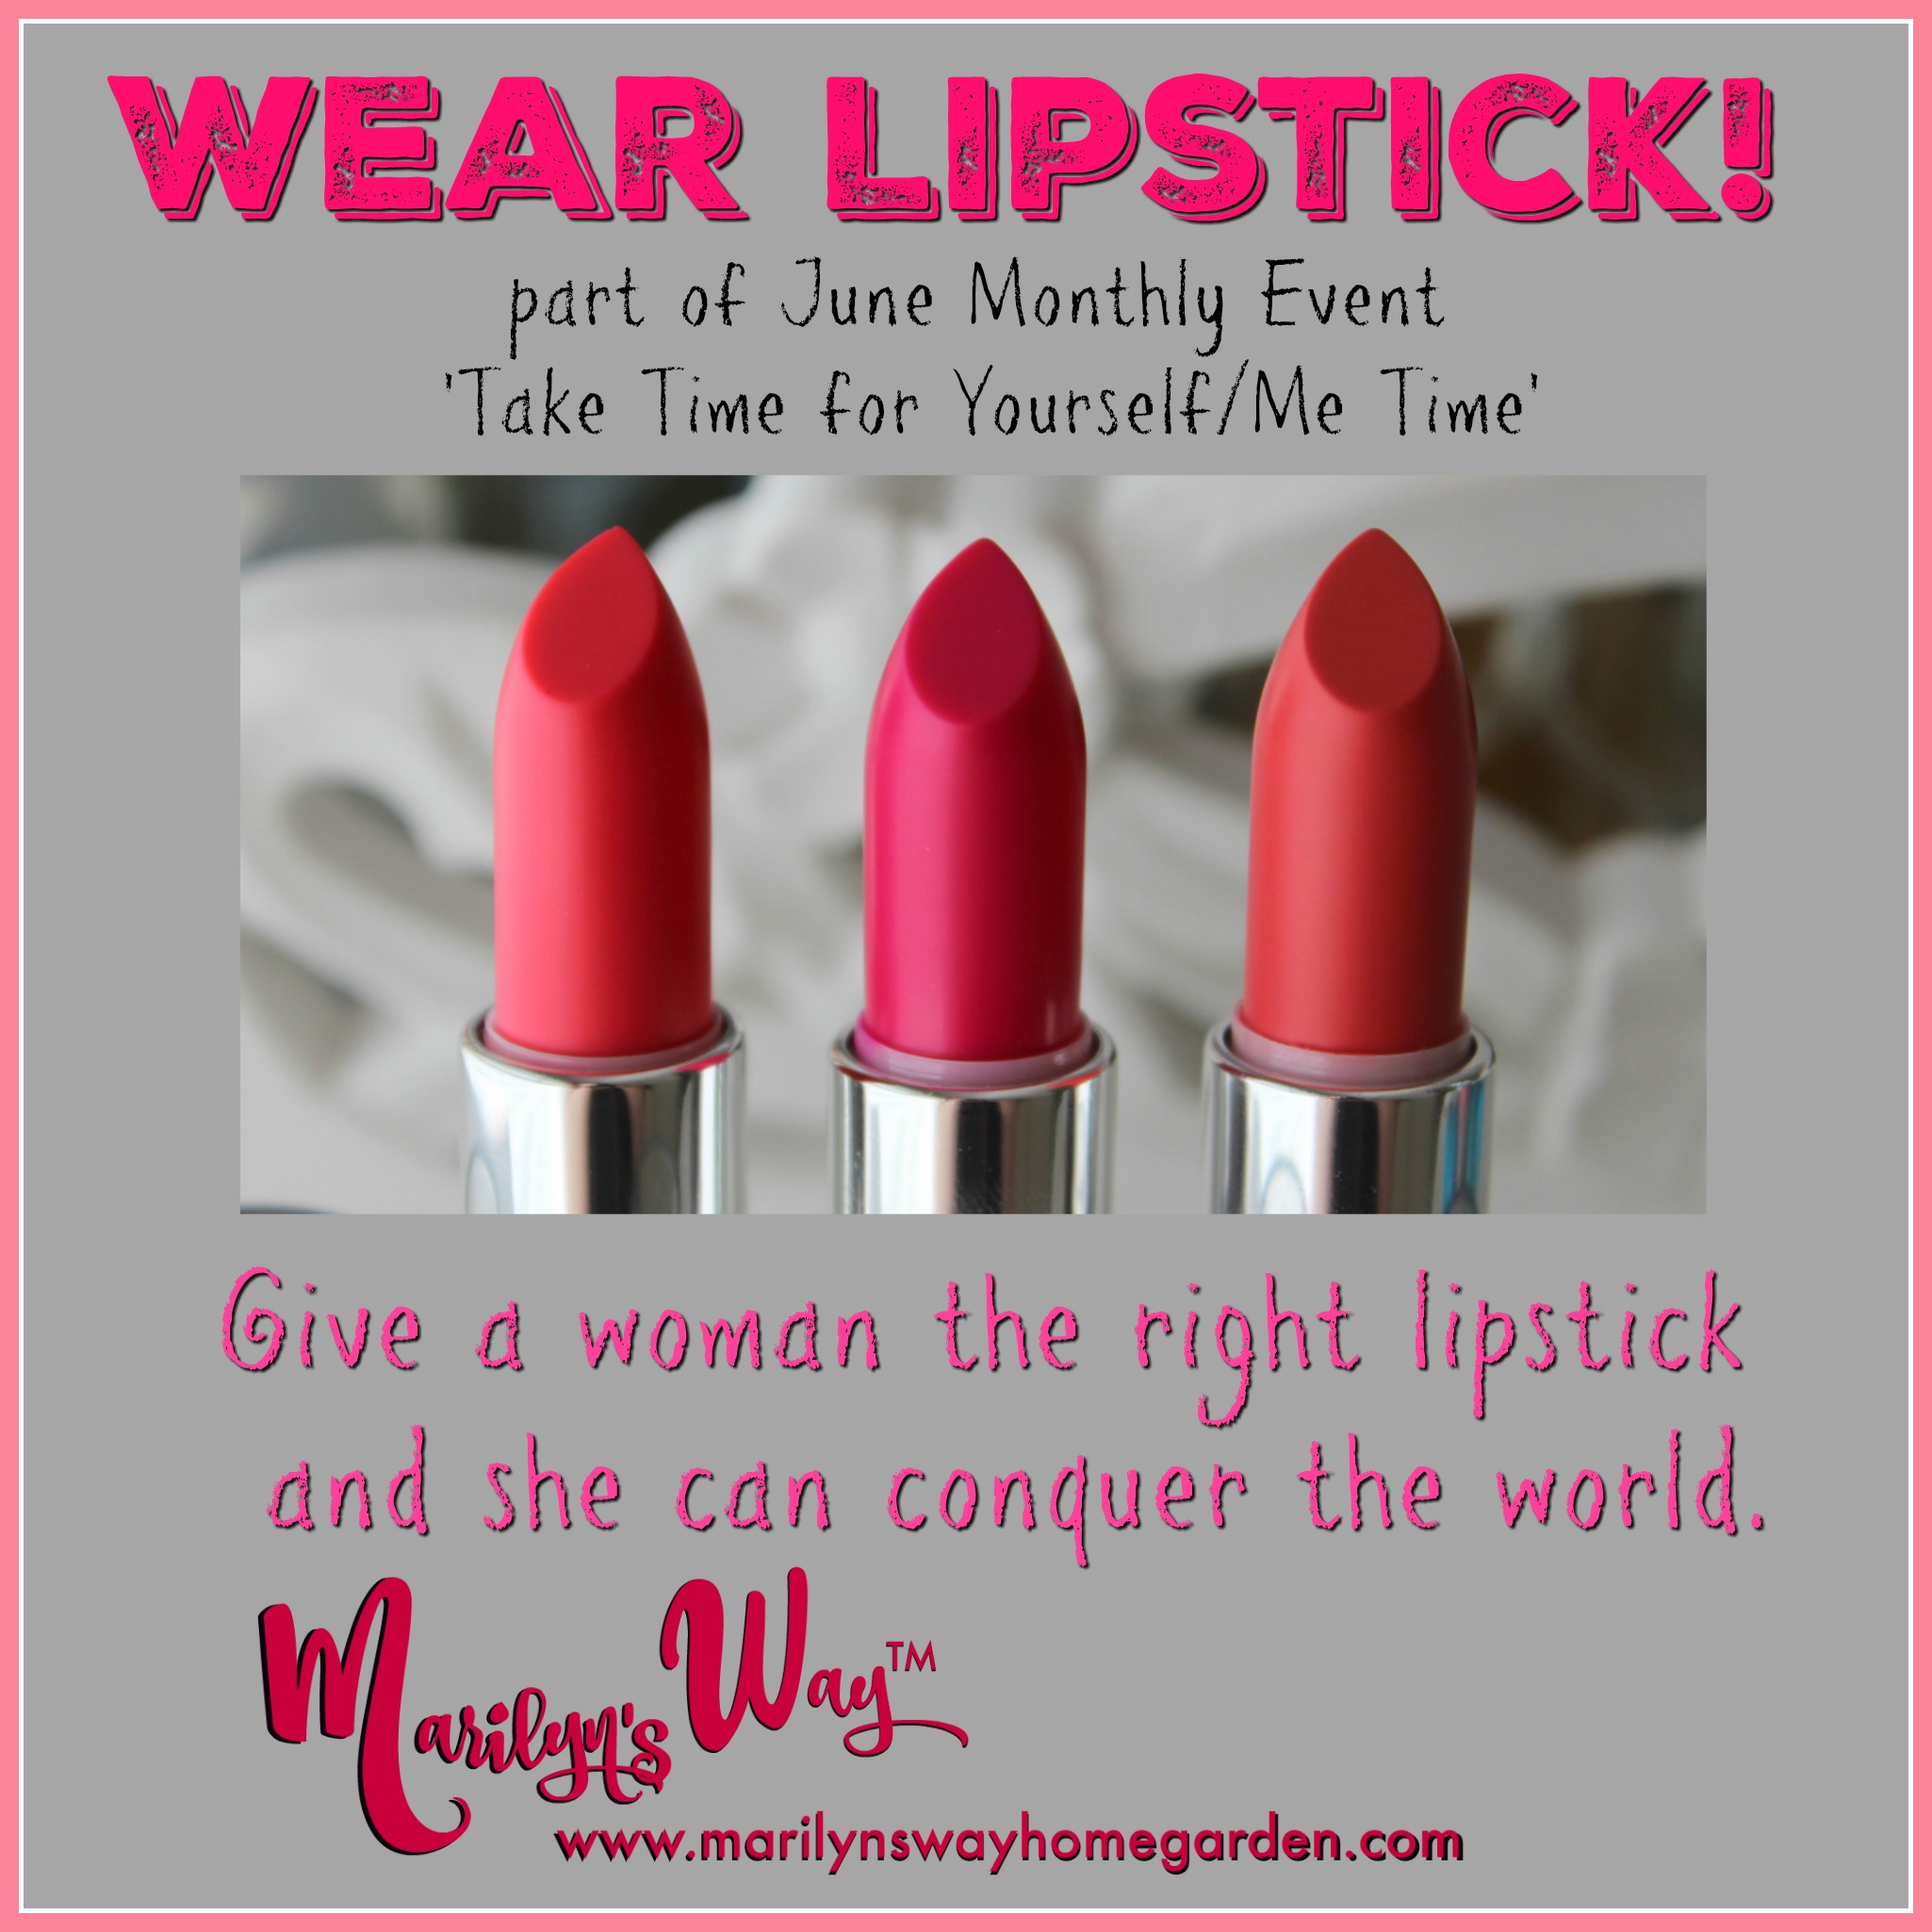 Many of the greats got through many situations simply by putting on some fresh lipstick and to begin again.